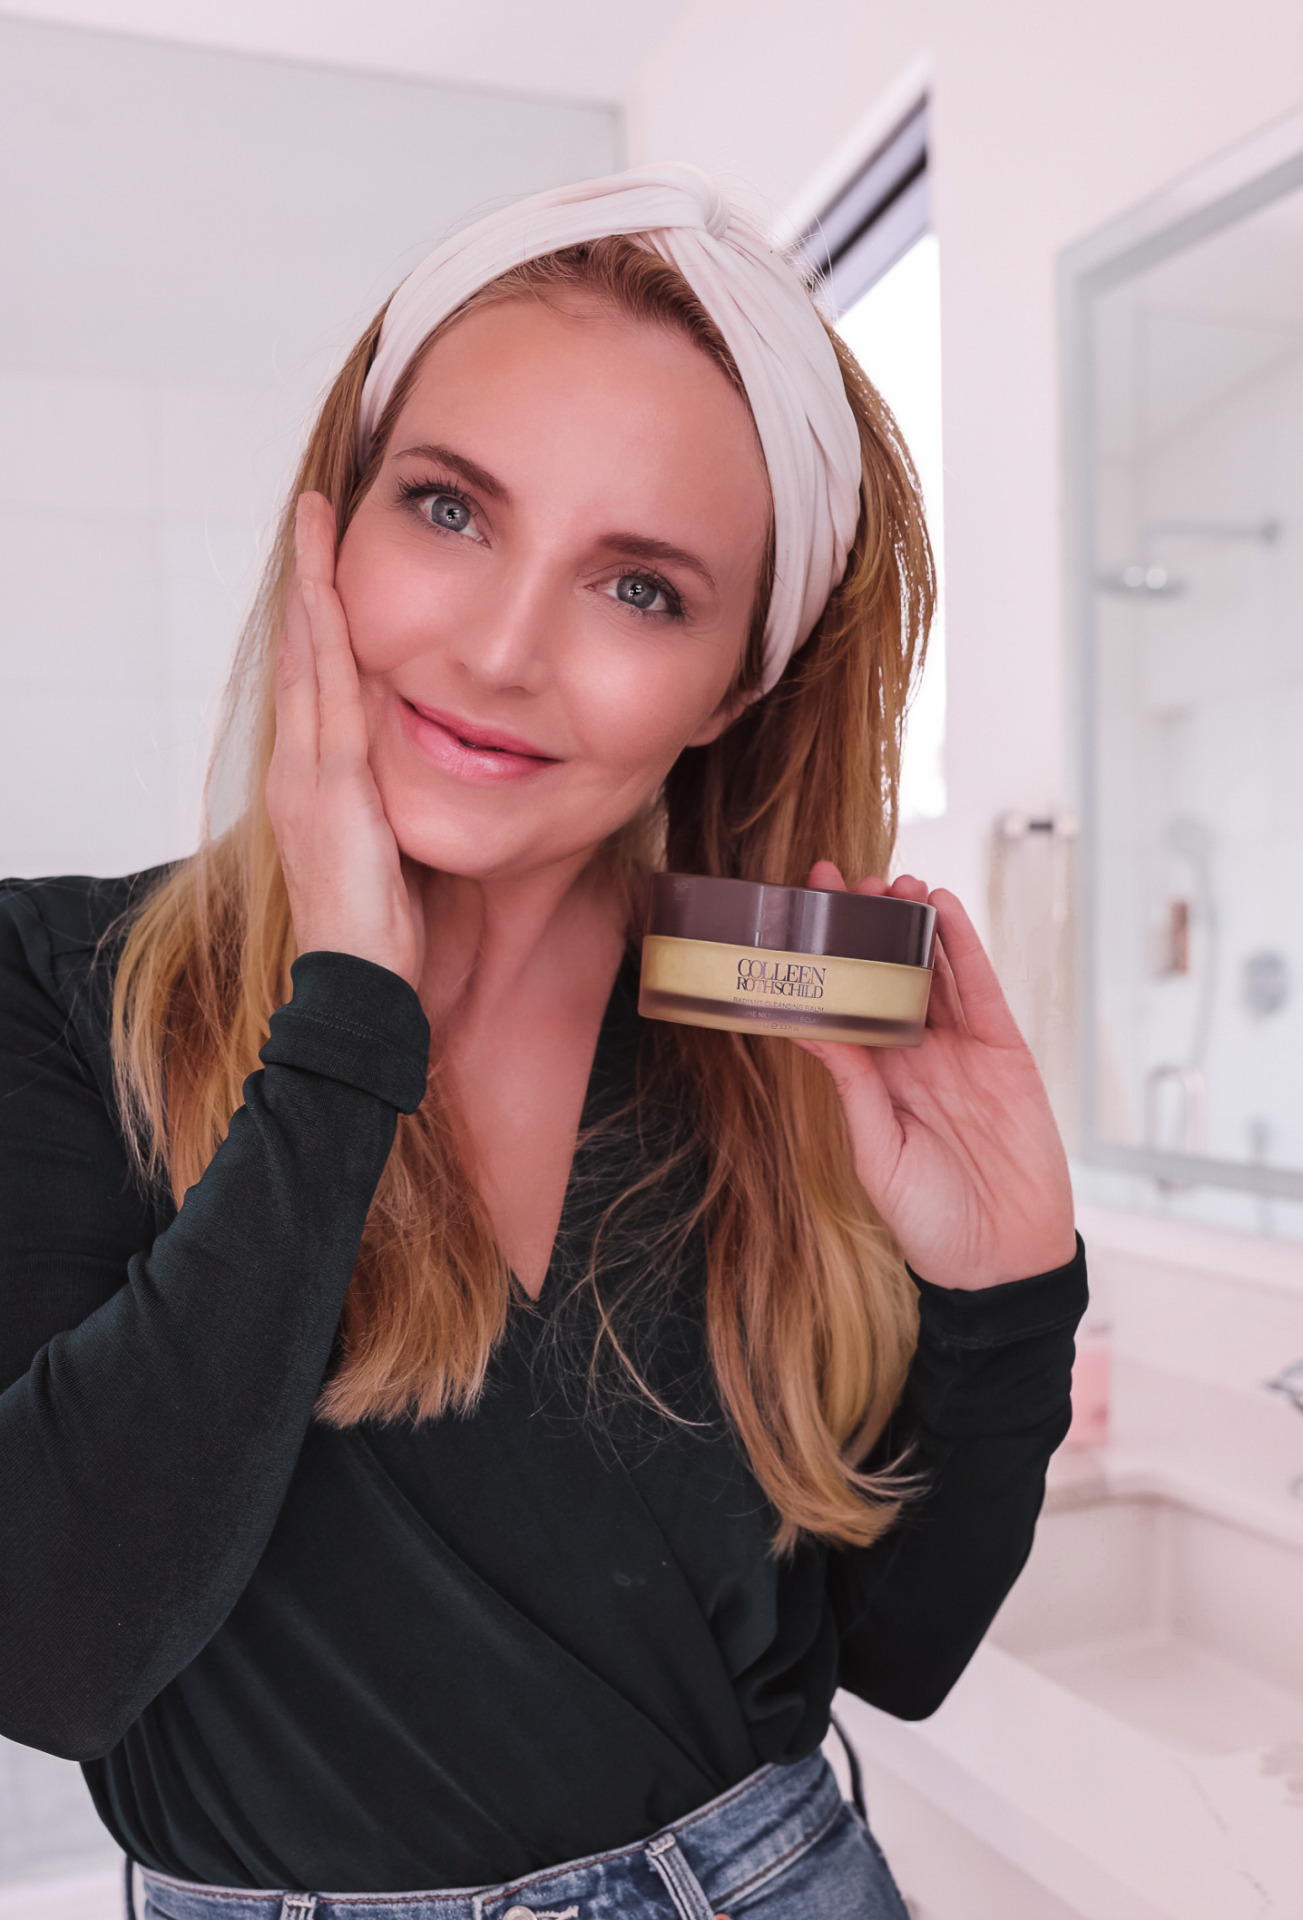 Clean beauty favorites featuring colleen rothschild radiant cleansing balm